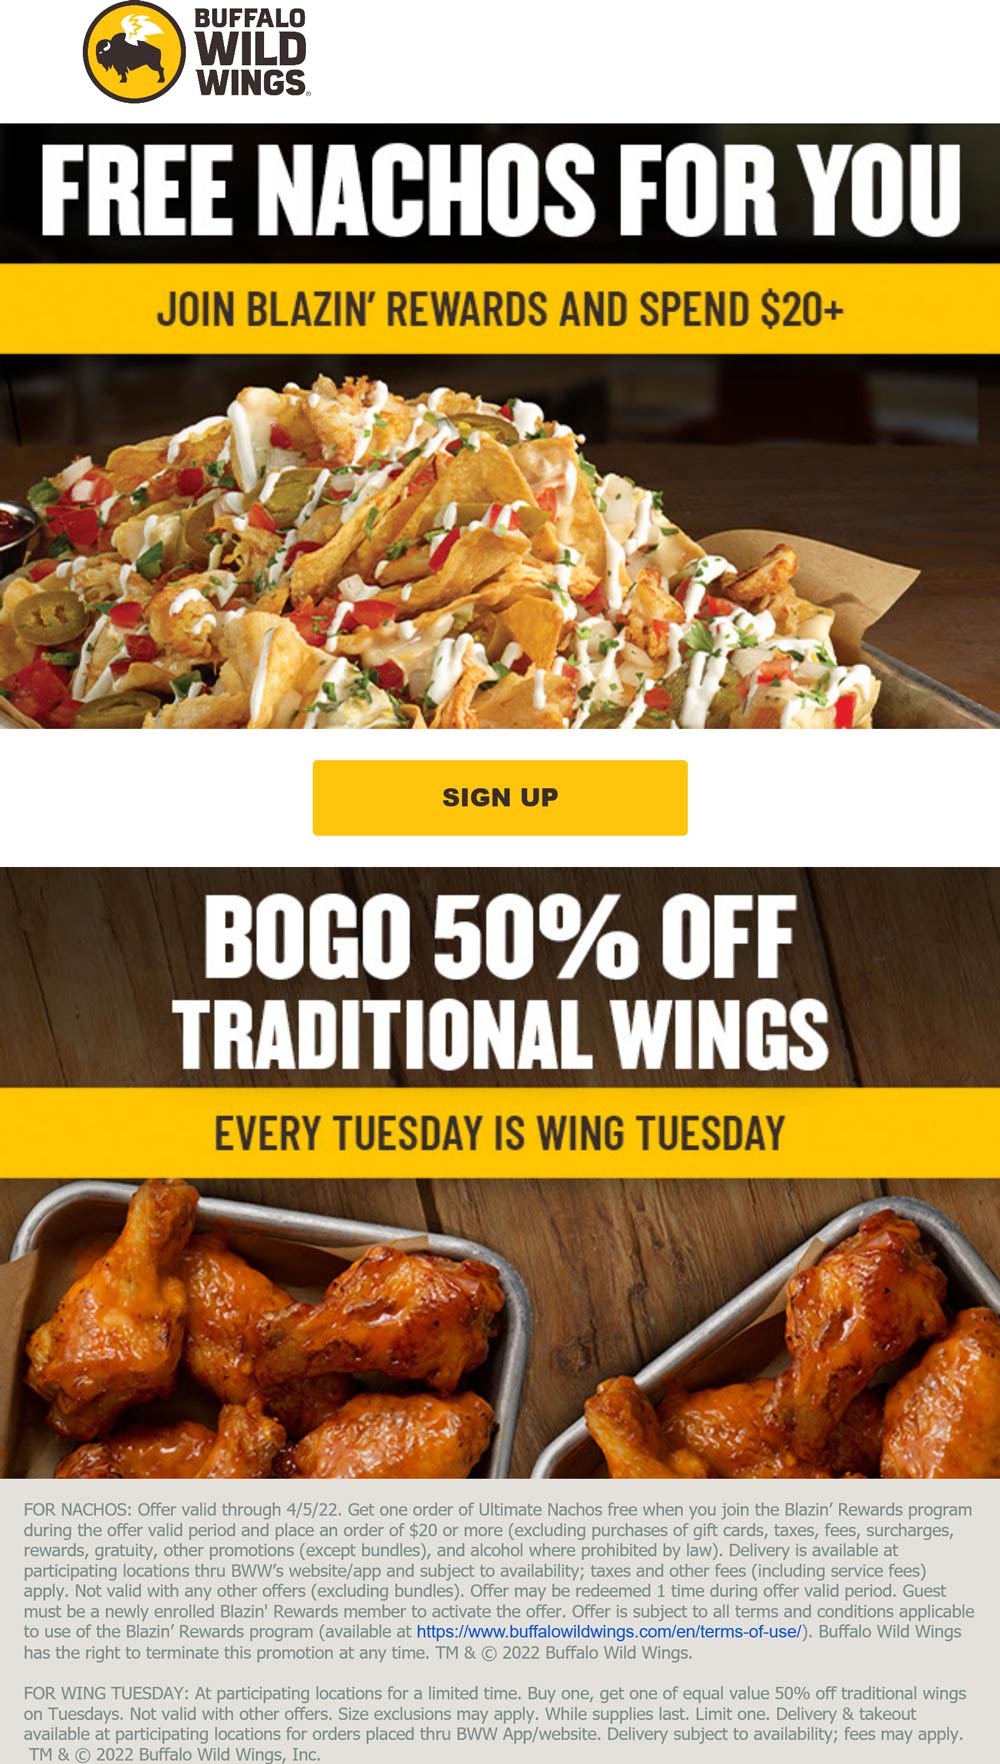 Buffalo Wild Wings restaurants Coupon  Second chicken wings 50% off today at Buffalo Wild Wings #buffalowildwings 